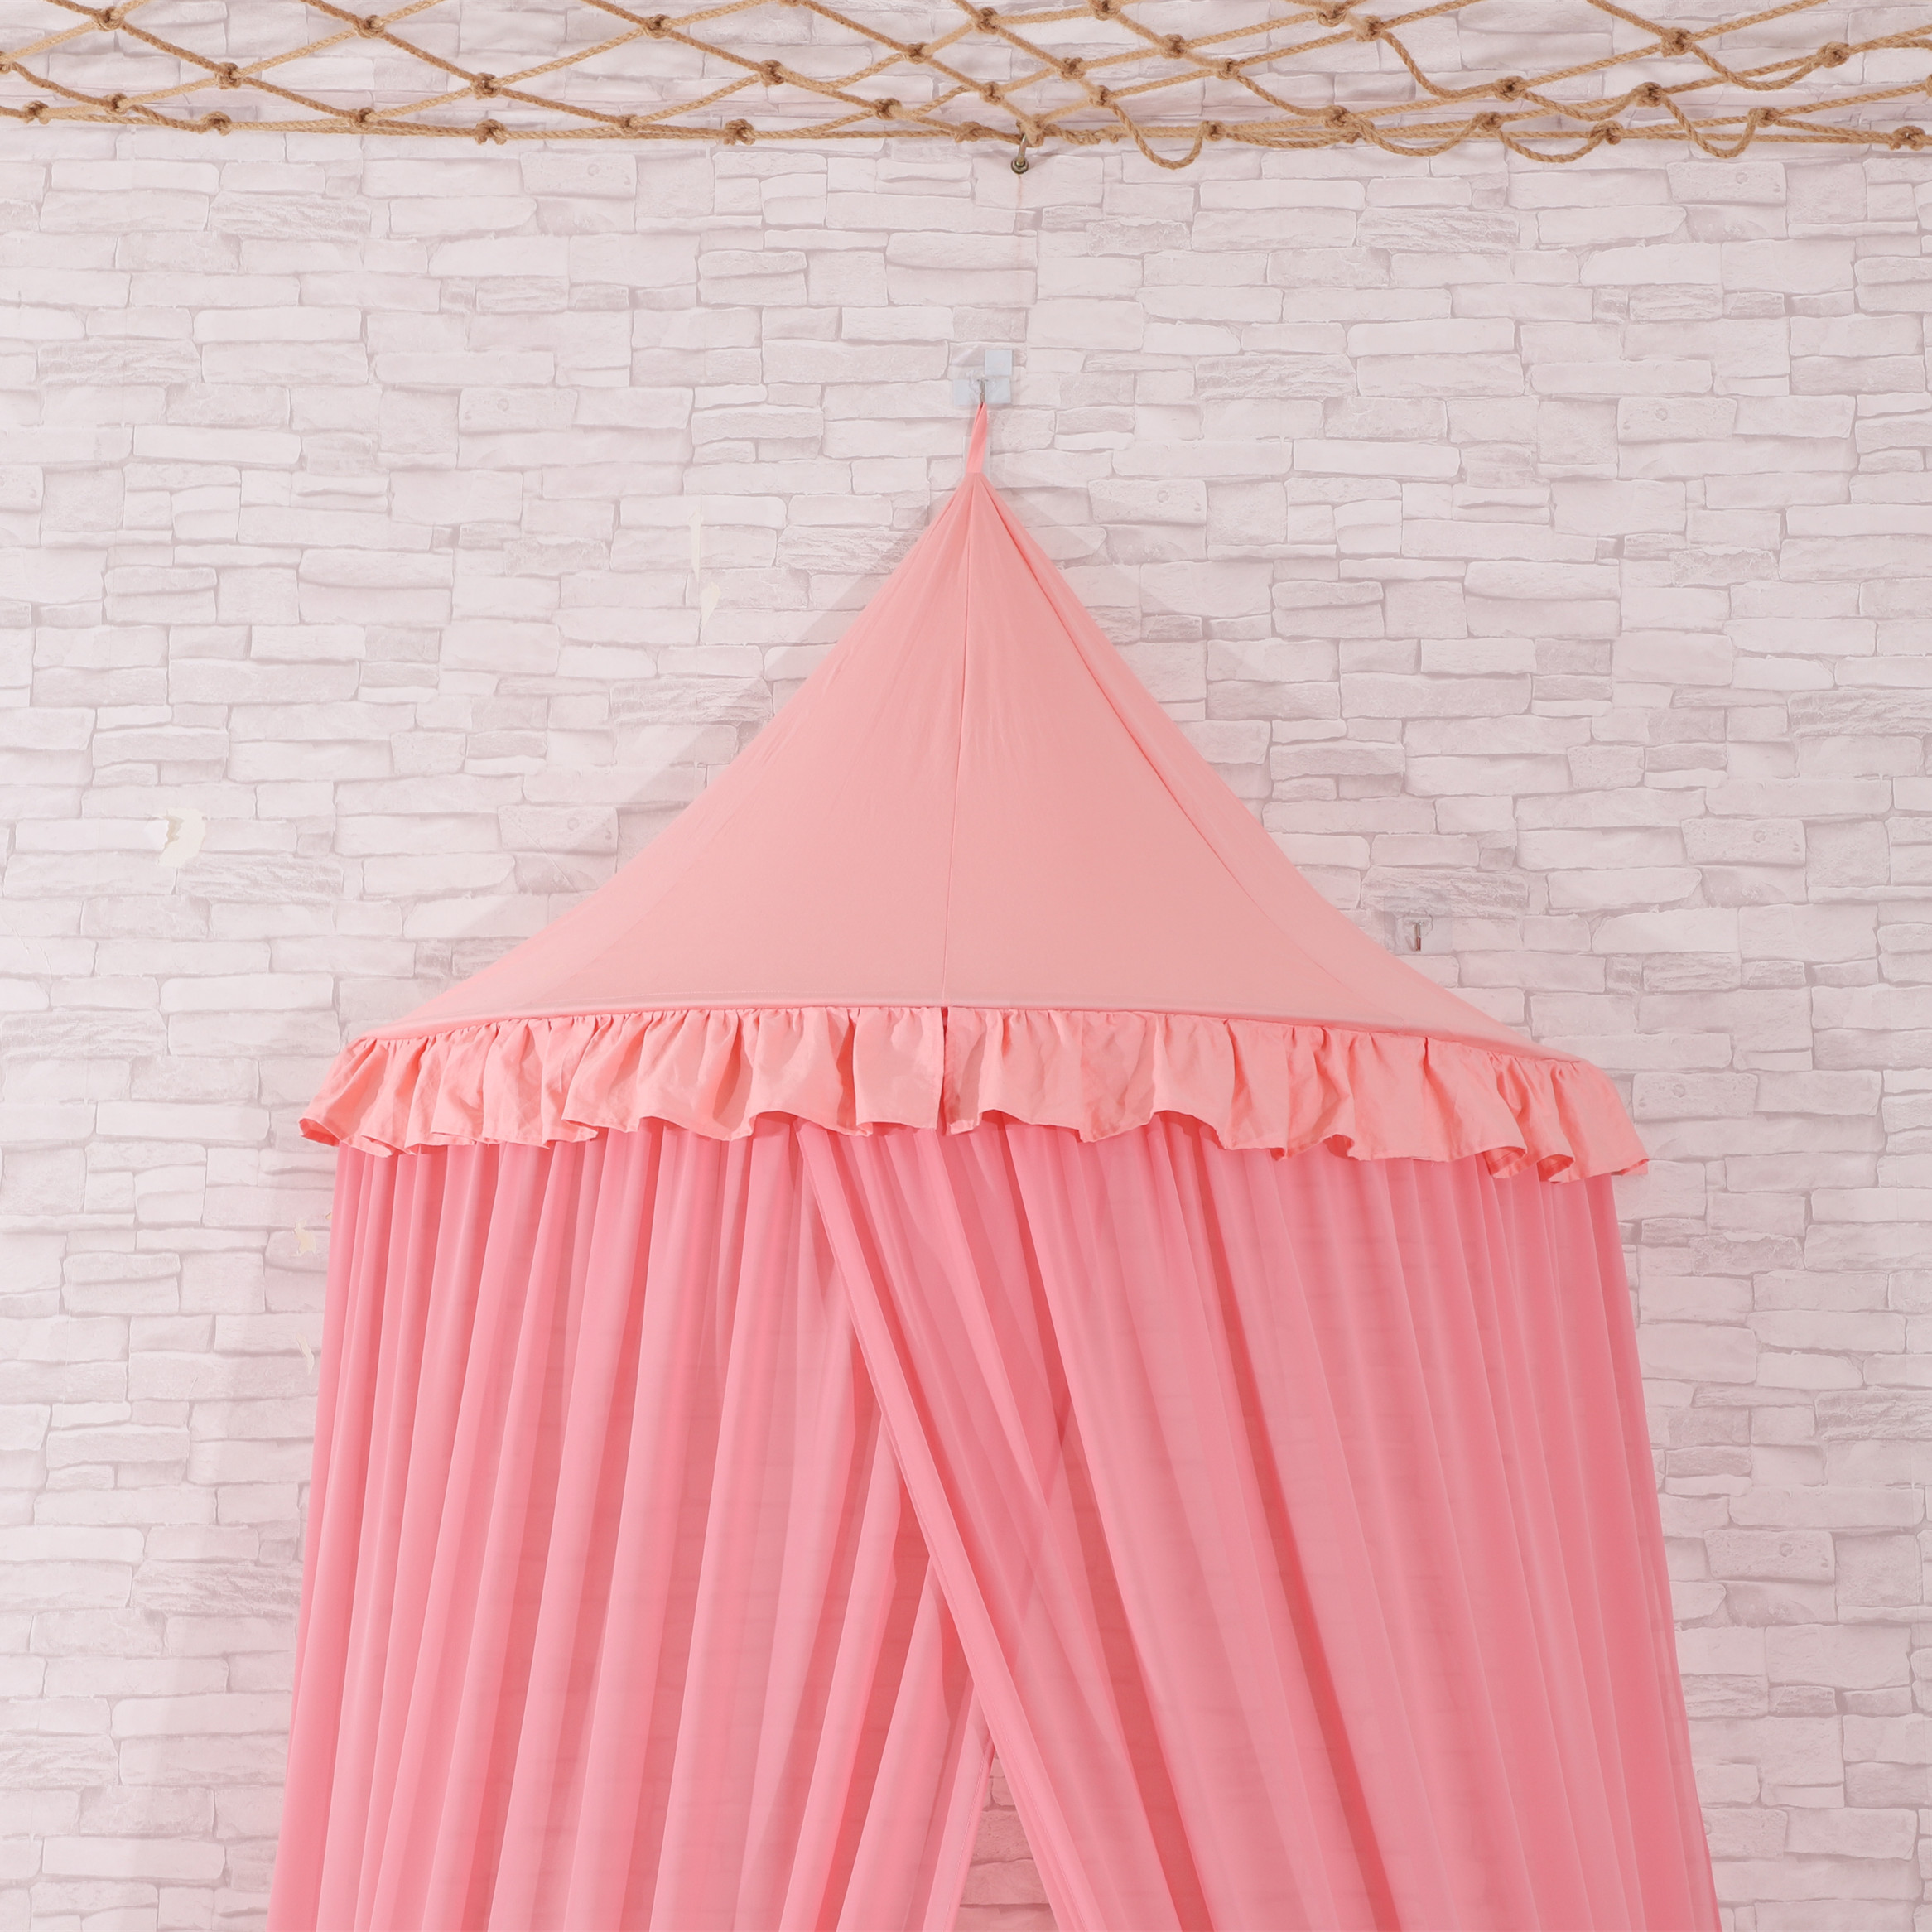 Nuevo diseño Princess Mosquito Nets Half Round Girls Bedside Bed Canopy